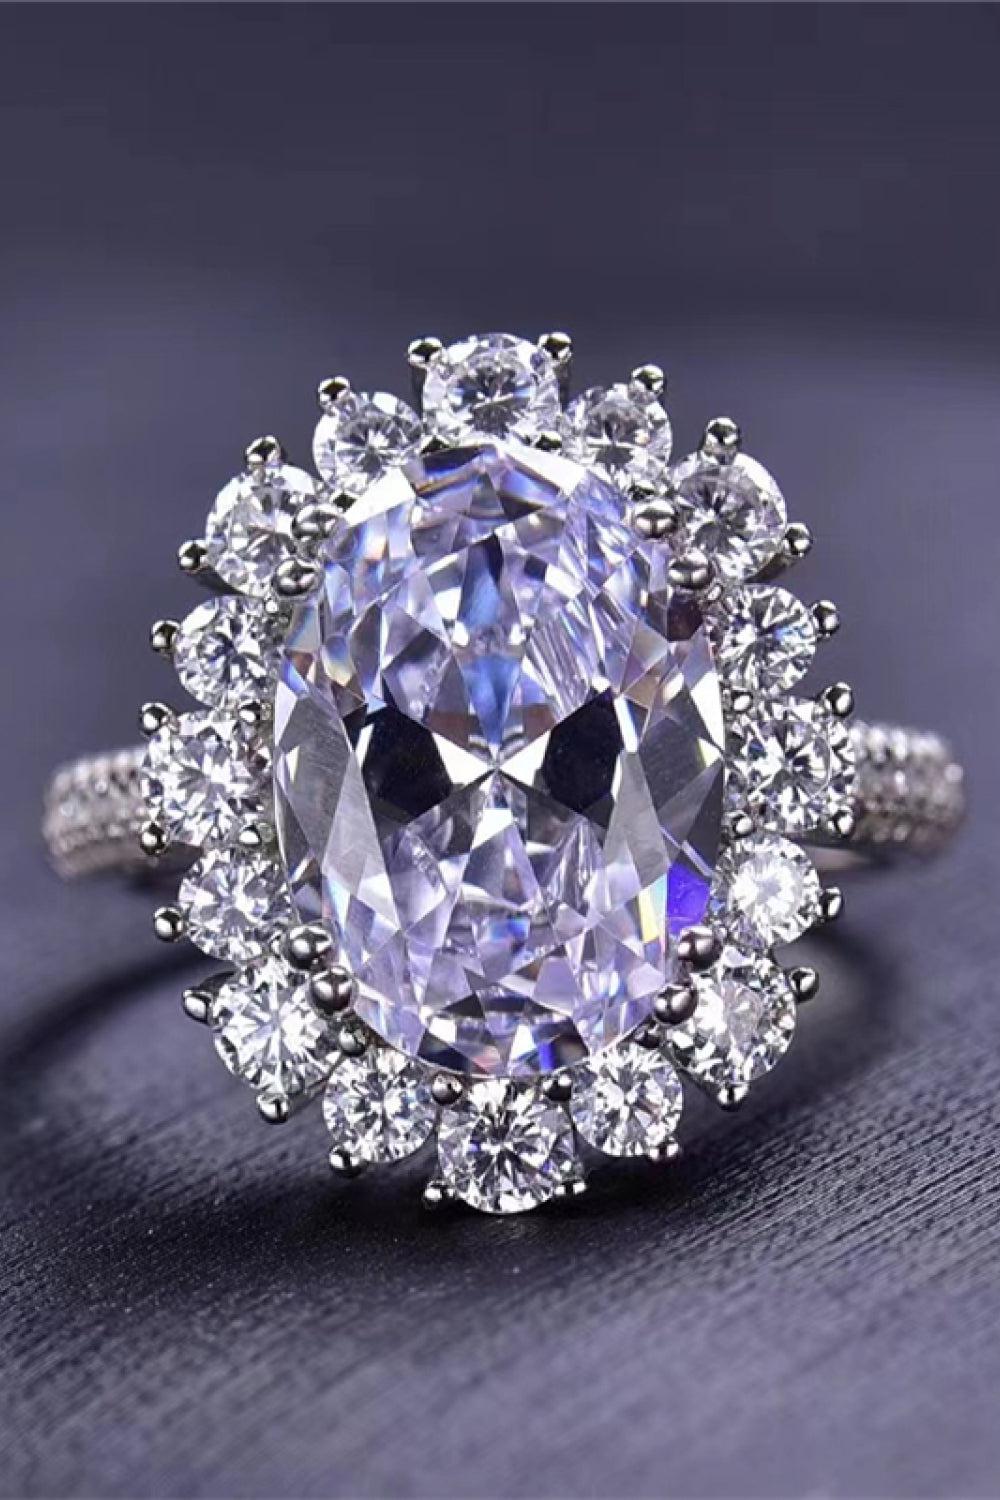 8 Carat Oval Moissanite Ring BLUE ZONE PLANET